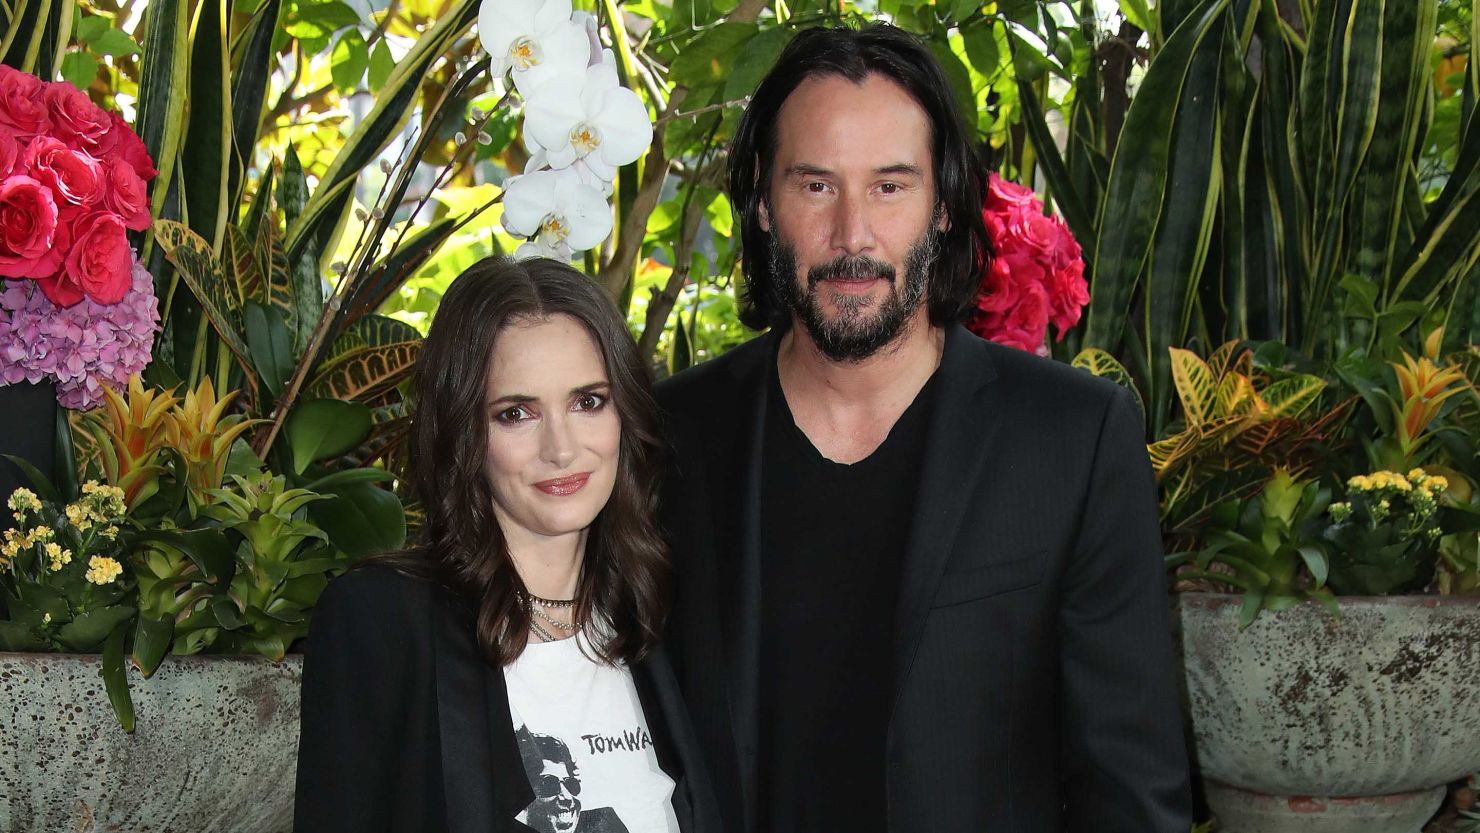 Winona Ryder says she and Keanu Reeves had a real wedding while filming "Dracula." 